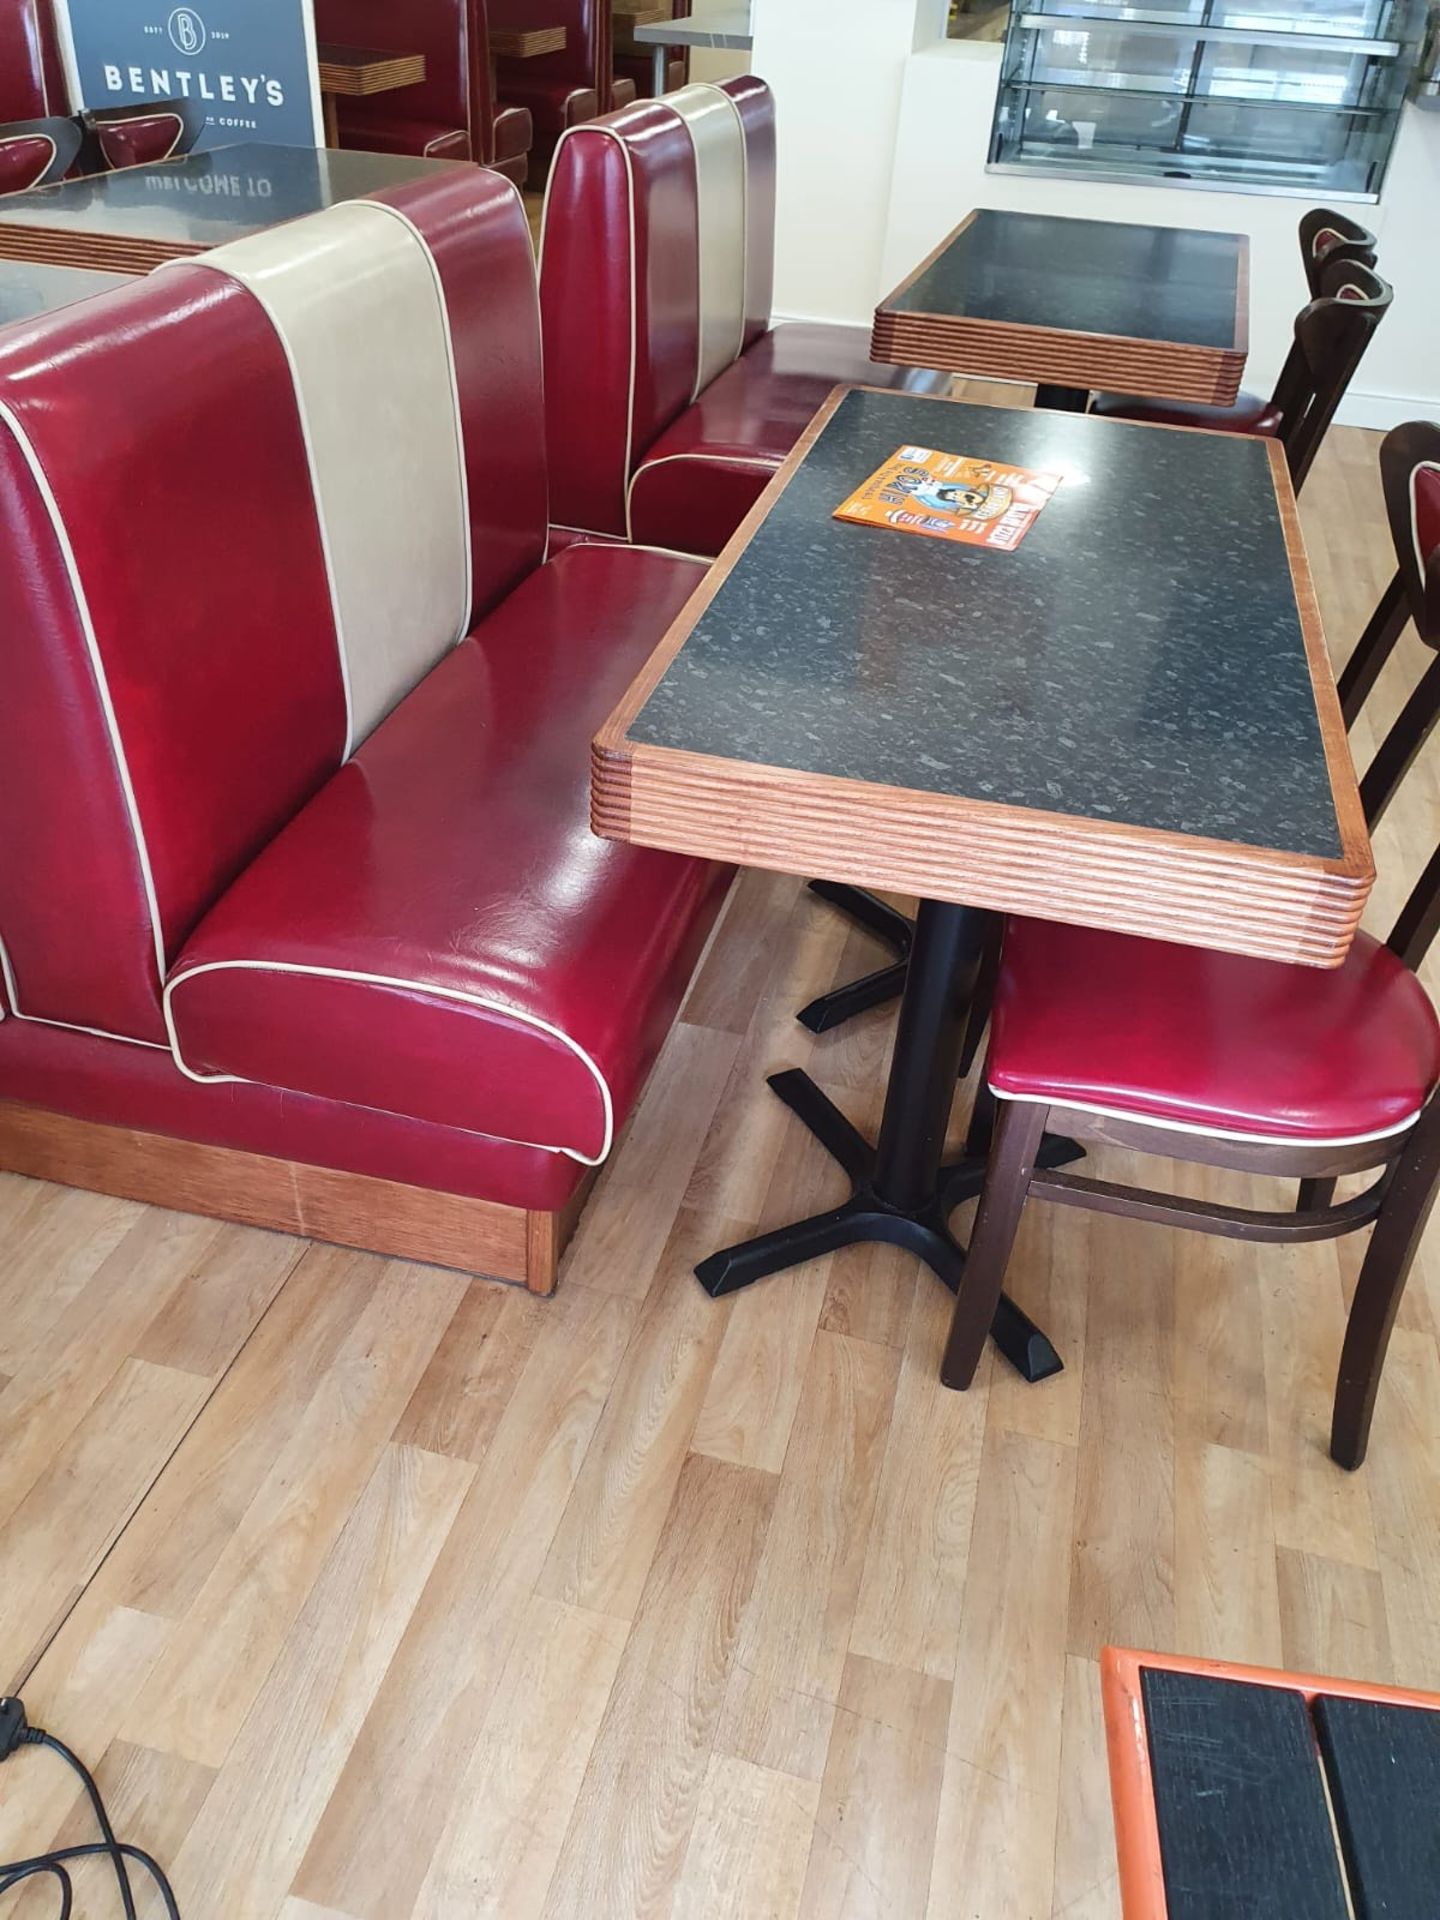 CAFE FURNITURE, CORNER BOOTH, BACK TO BACK SEATING, TABLES AND CHAIRS *NO VAT* - Image 3 of 7